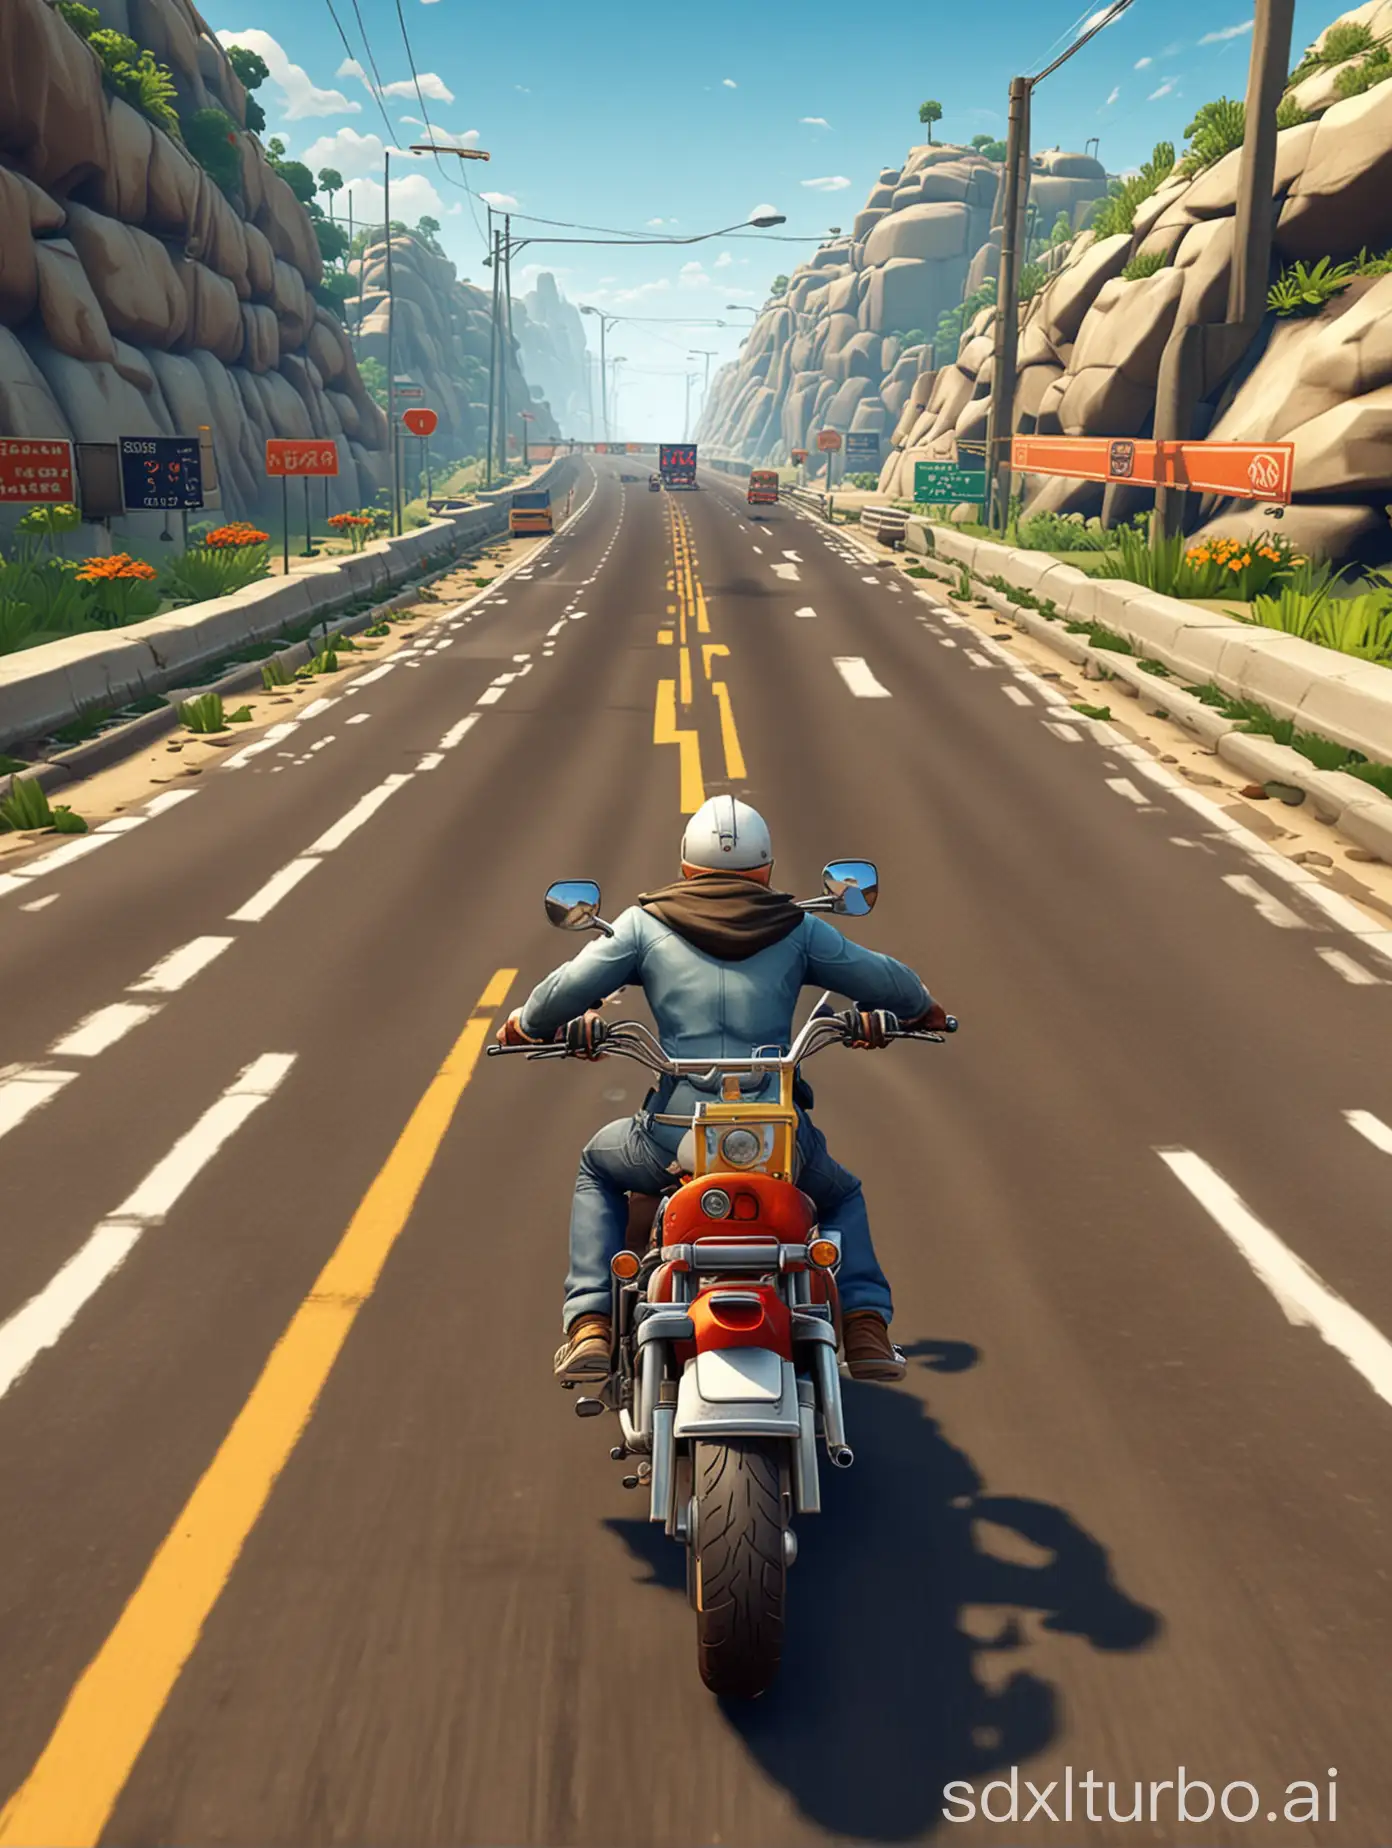 Subway surfer POV gameplay with  character riding motorcycle on interstate highway roads to another state, closer POV , flat/void surroundings(no mountain or anything). Low poly 3d Graphics, White surroundings literally flat white with only the highways and character visible